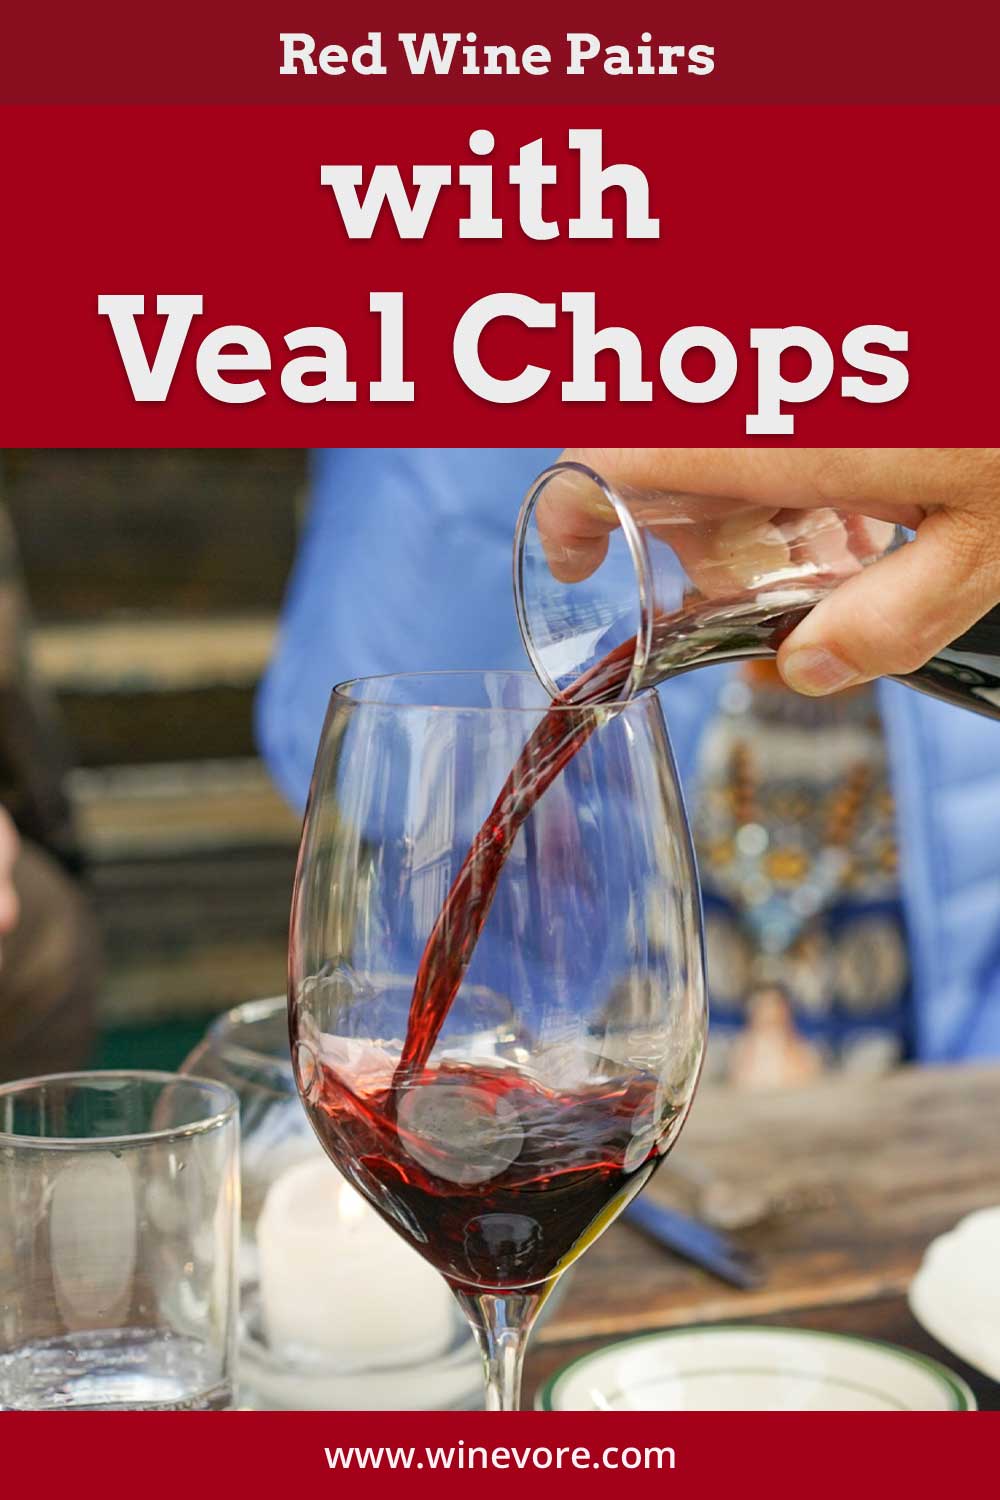 Red wine being poured into a glass from a decanter - Red Wine Pairs with Veal Chops.